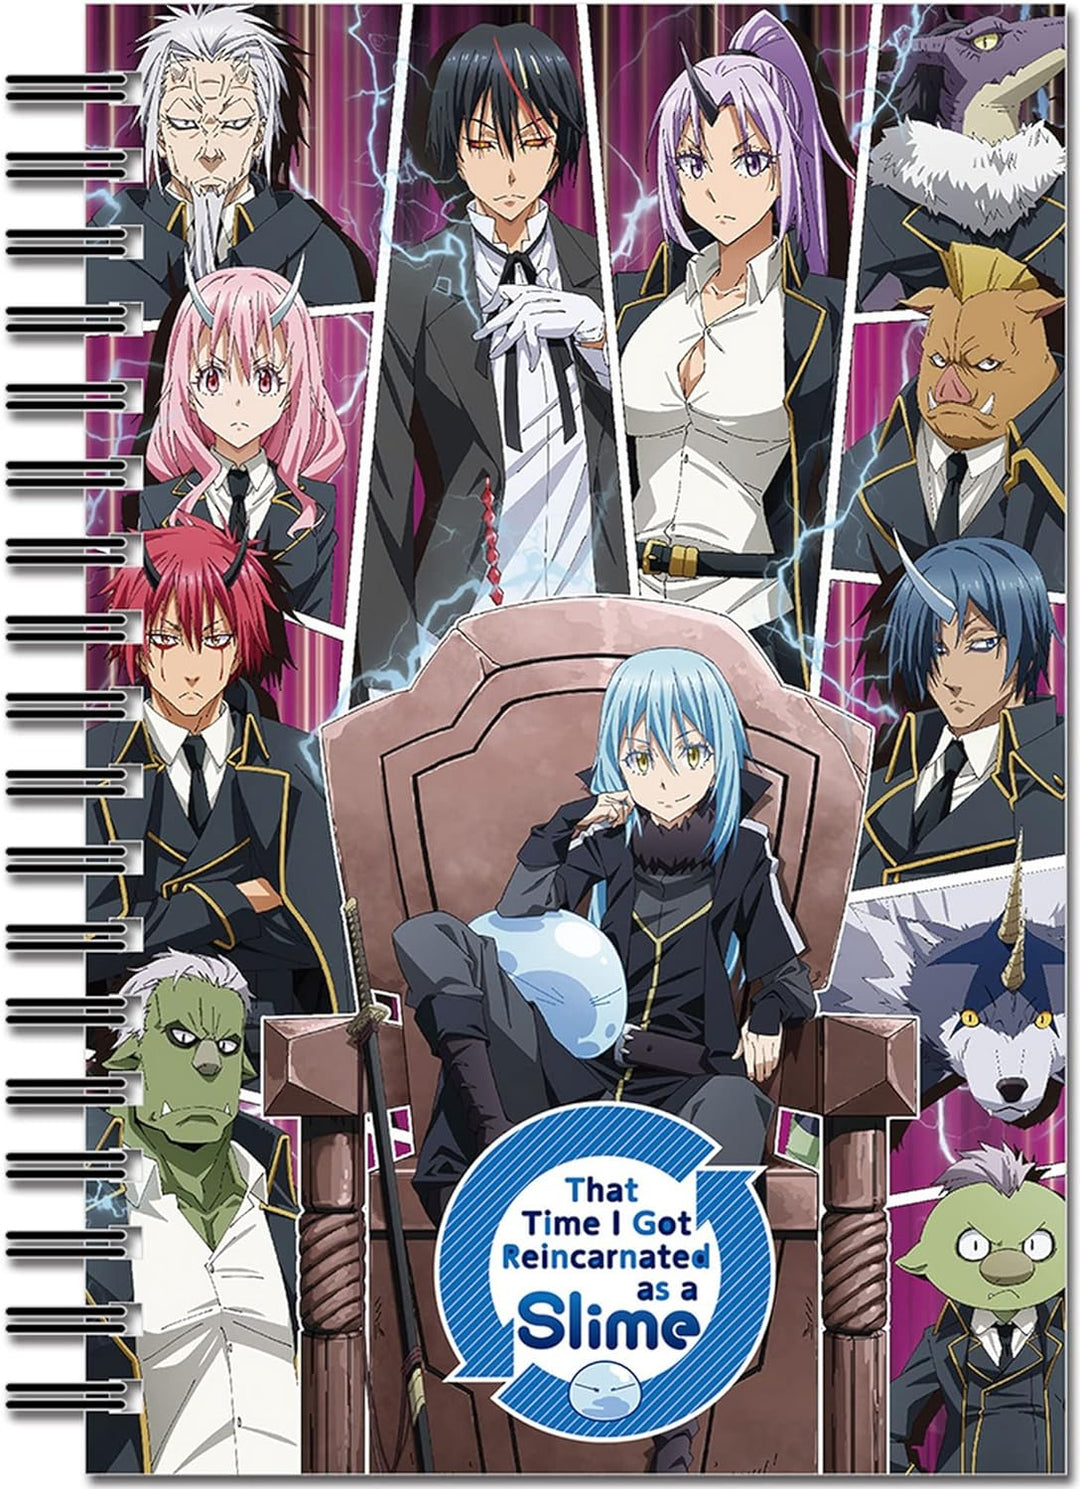 Great Eastern Entertainment That Time I Got Reincarnated As A Slime - Key Art #1 Hardcover Notebook